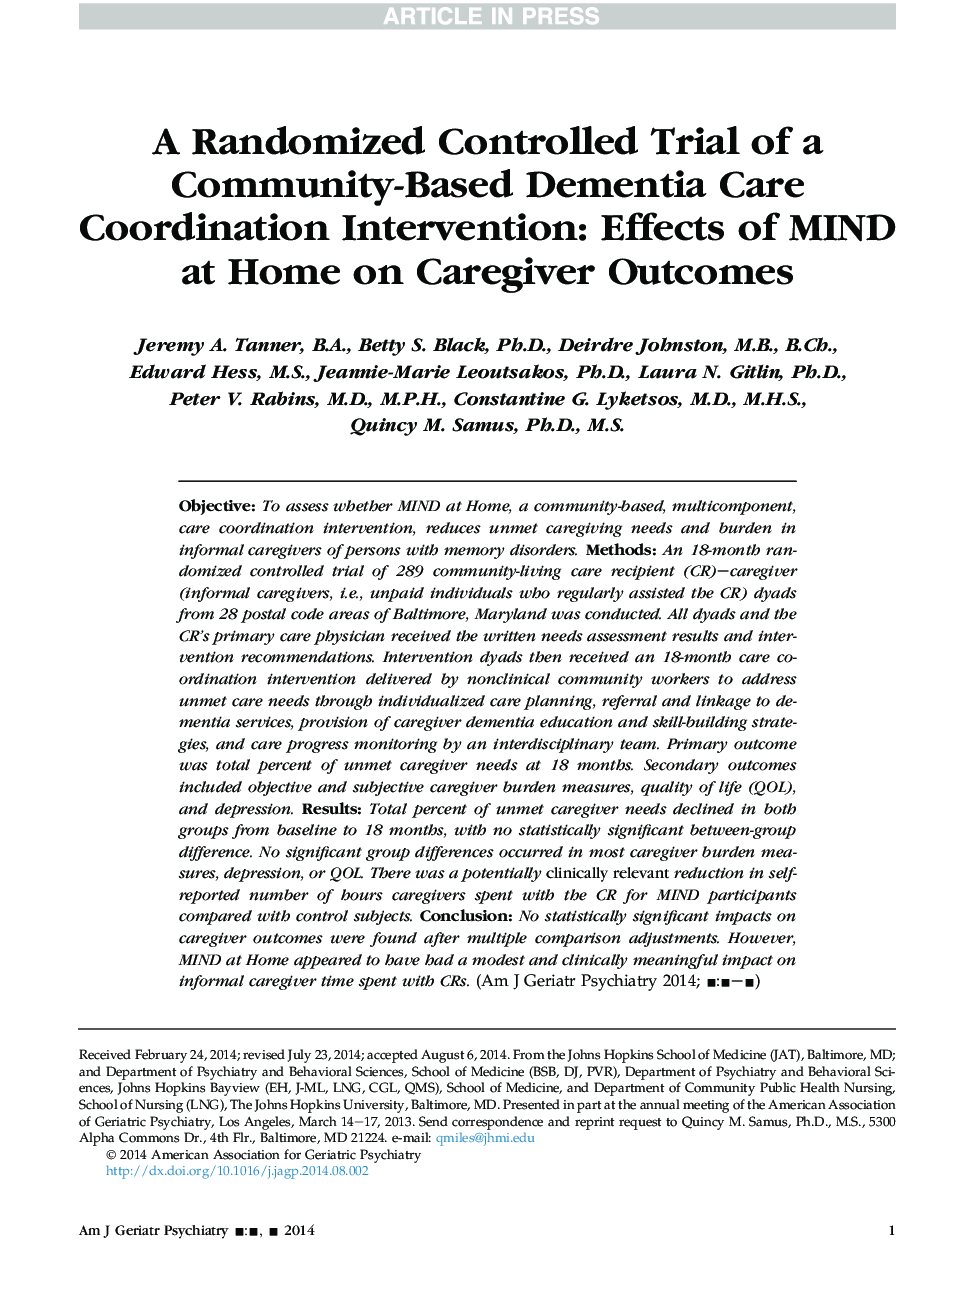 A Randomized Controlled Trial of a Community-Based Dementia Care Coordination Intervention: Effects of MIND at Home on Caregiver Outcomes